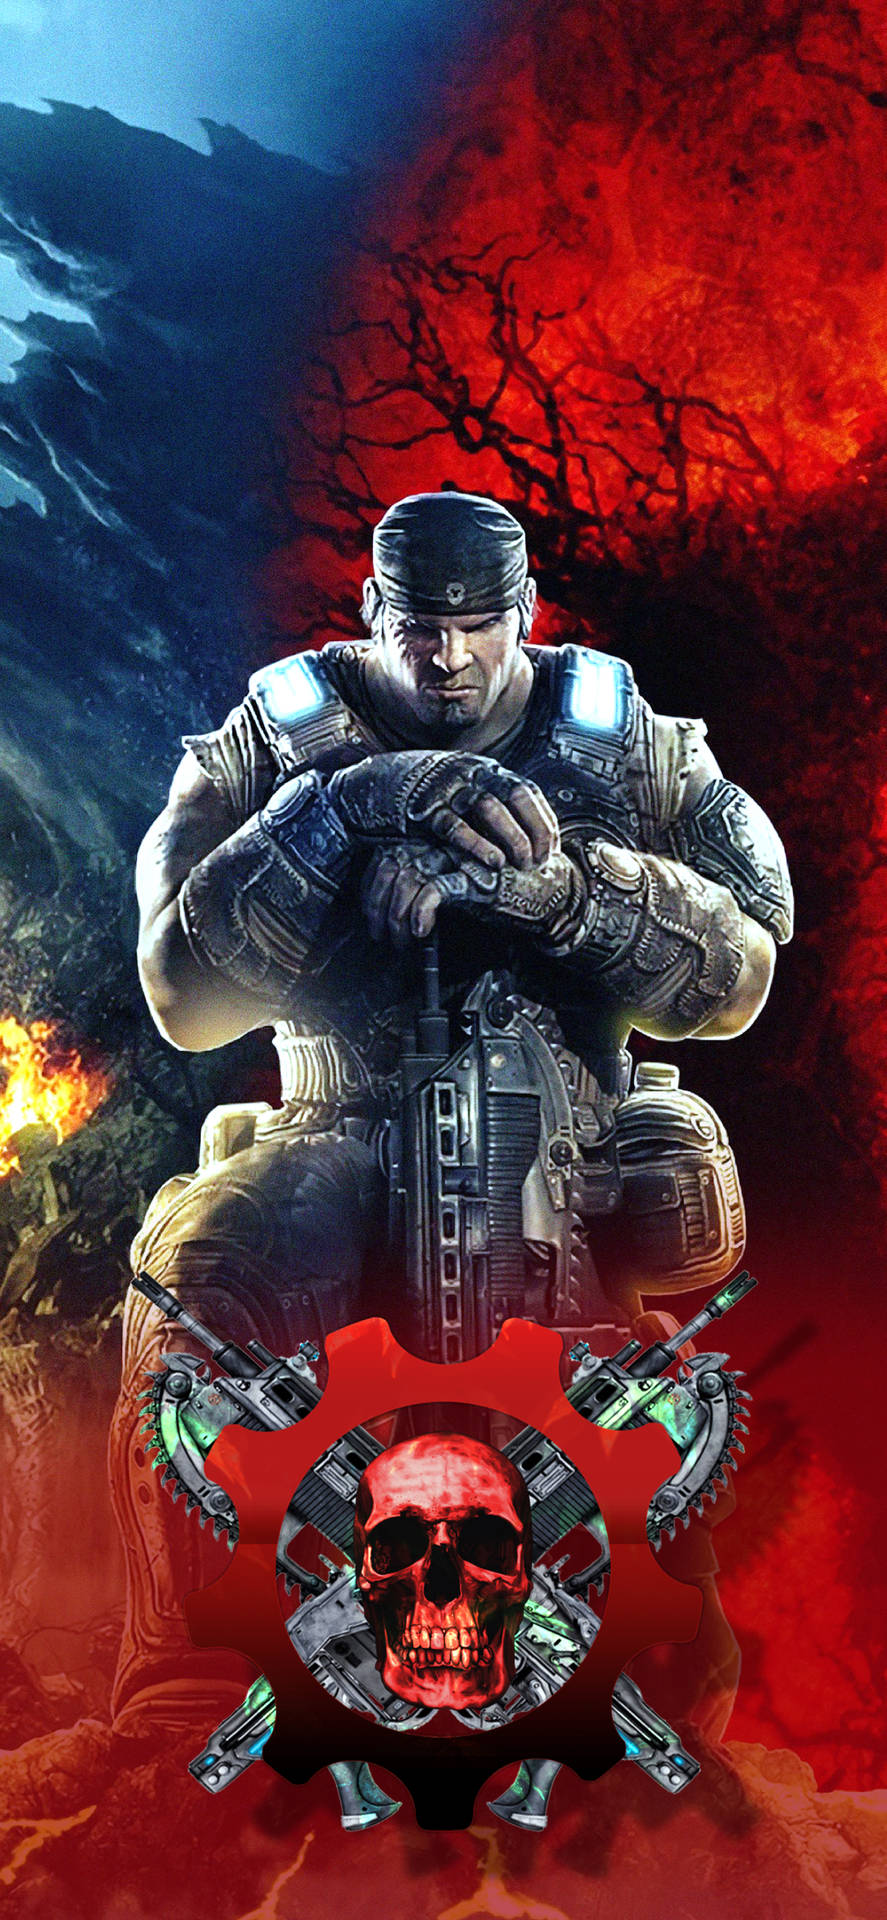 Victorious Marcus Fenix Gears 5 Iphone